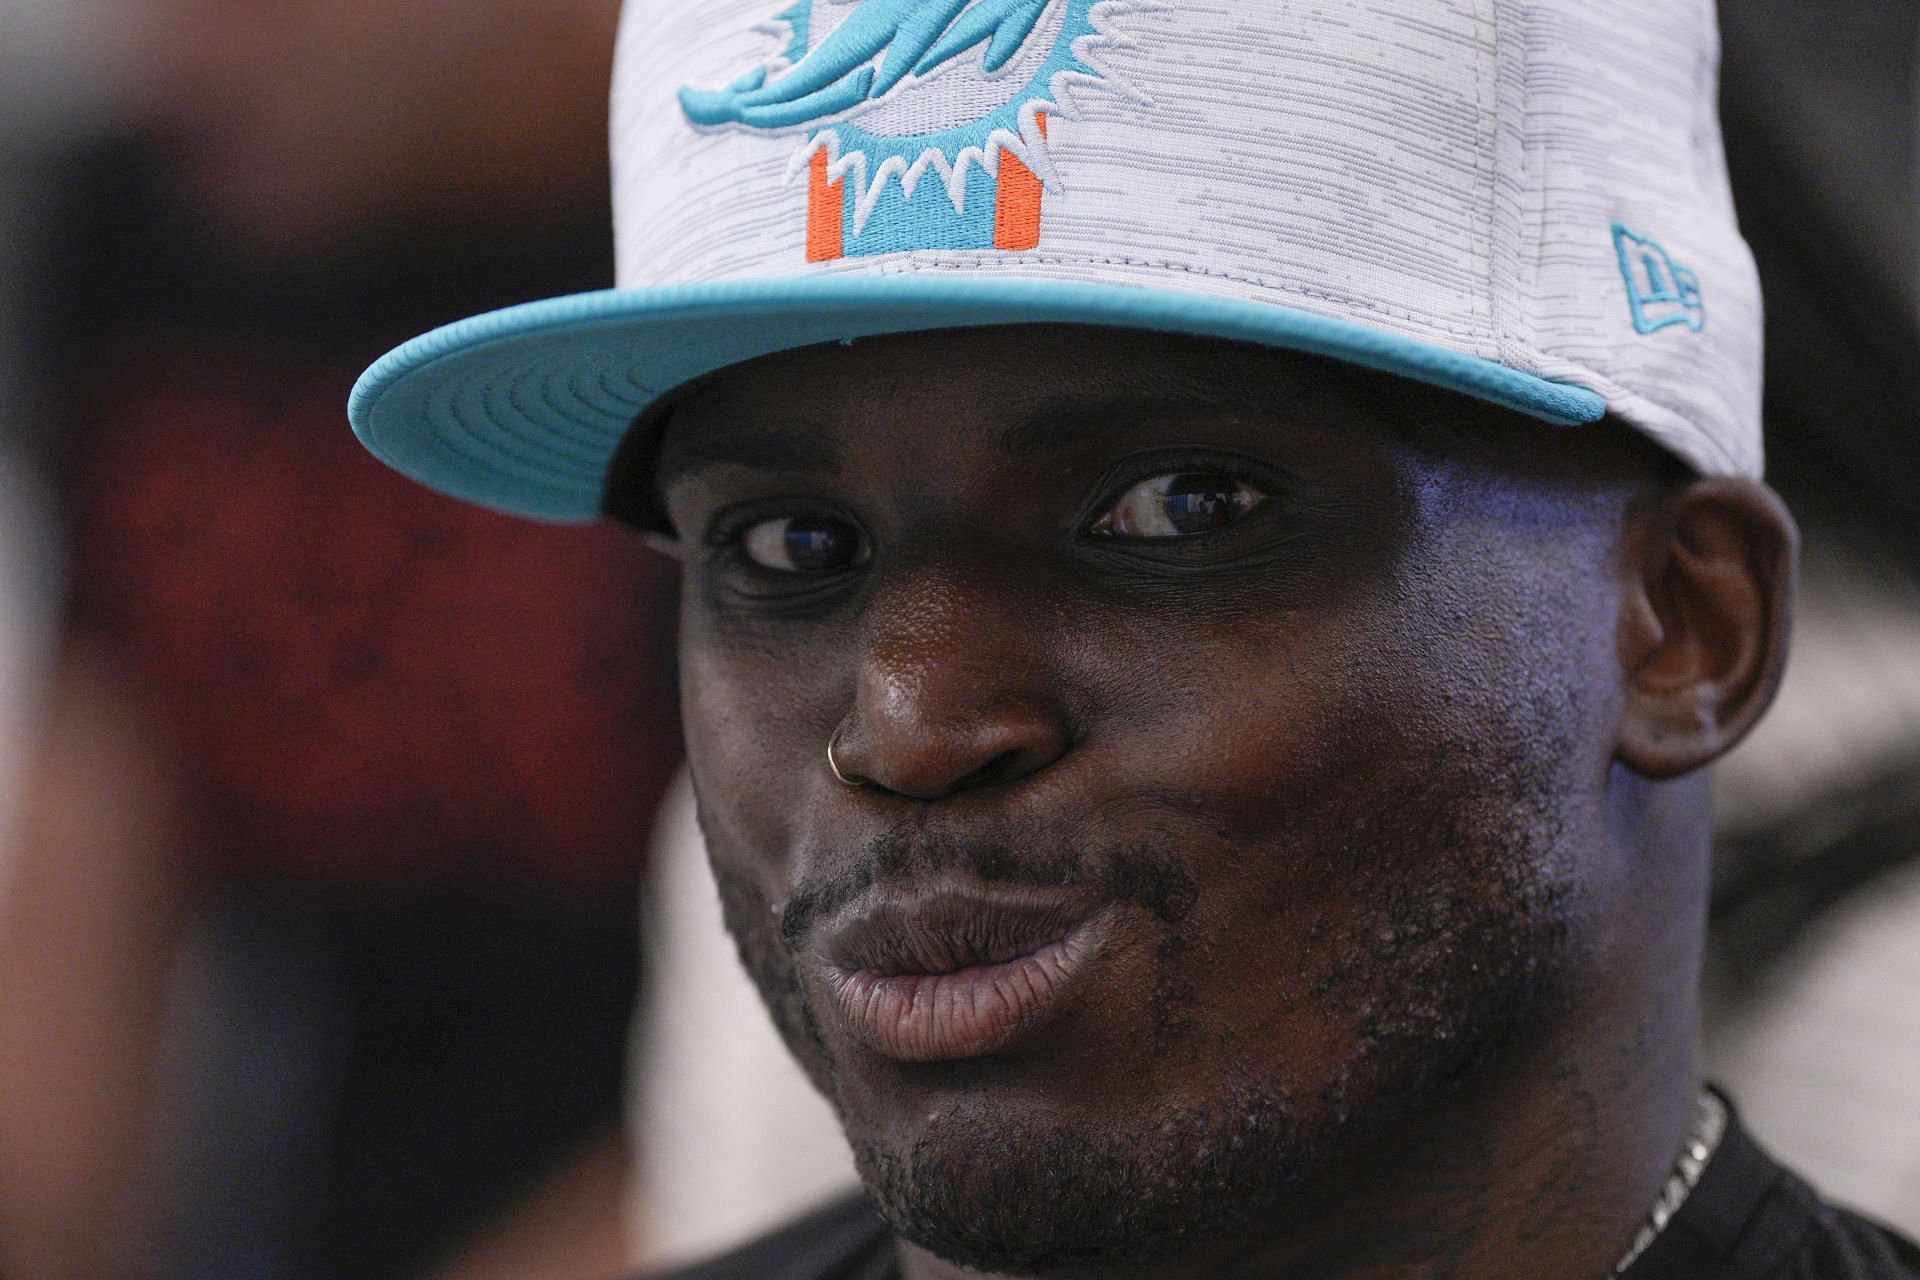 Miami Dolphins wide receiver Tyreek Hill